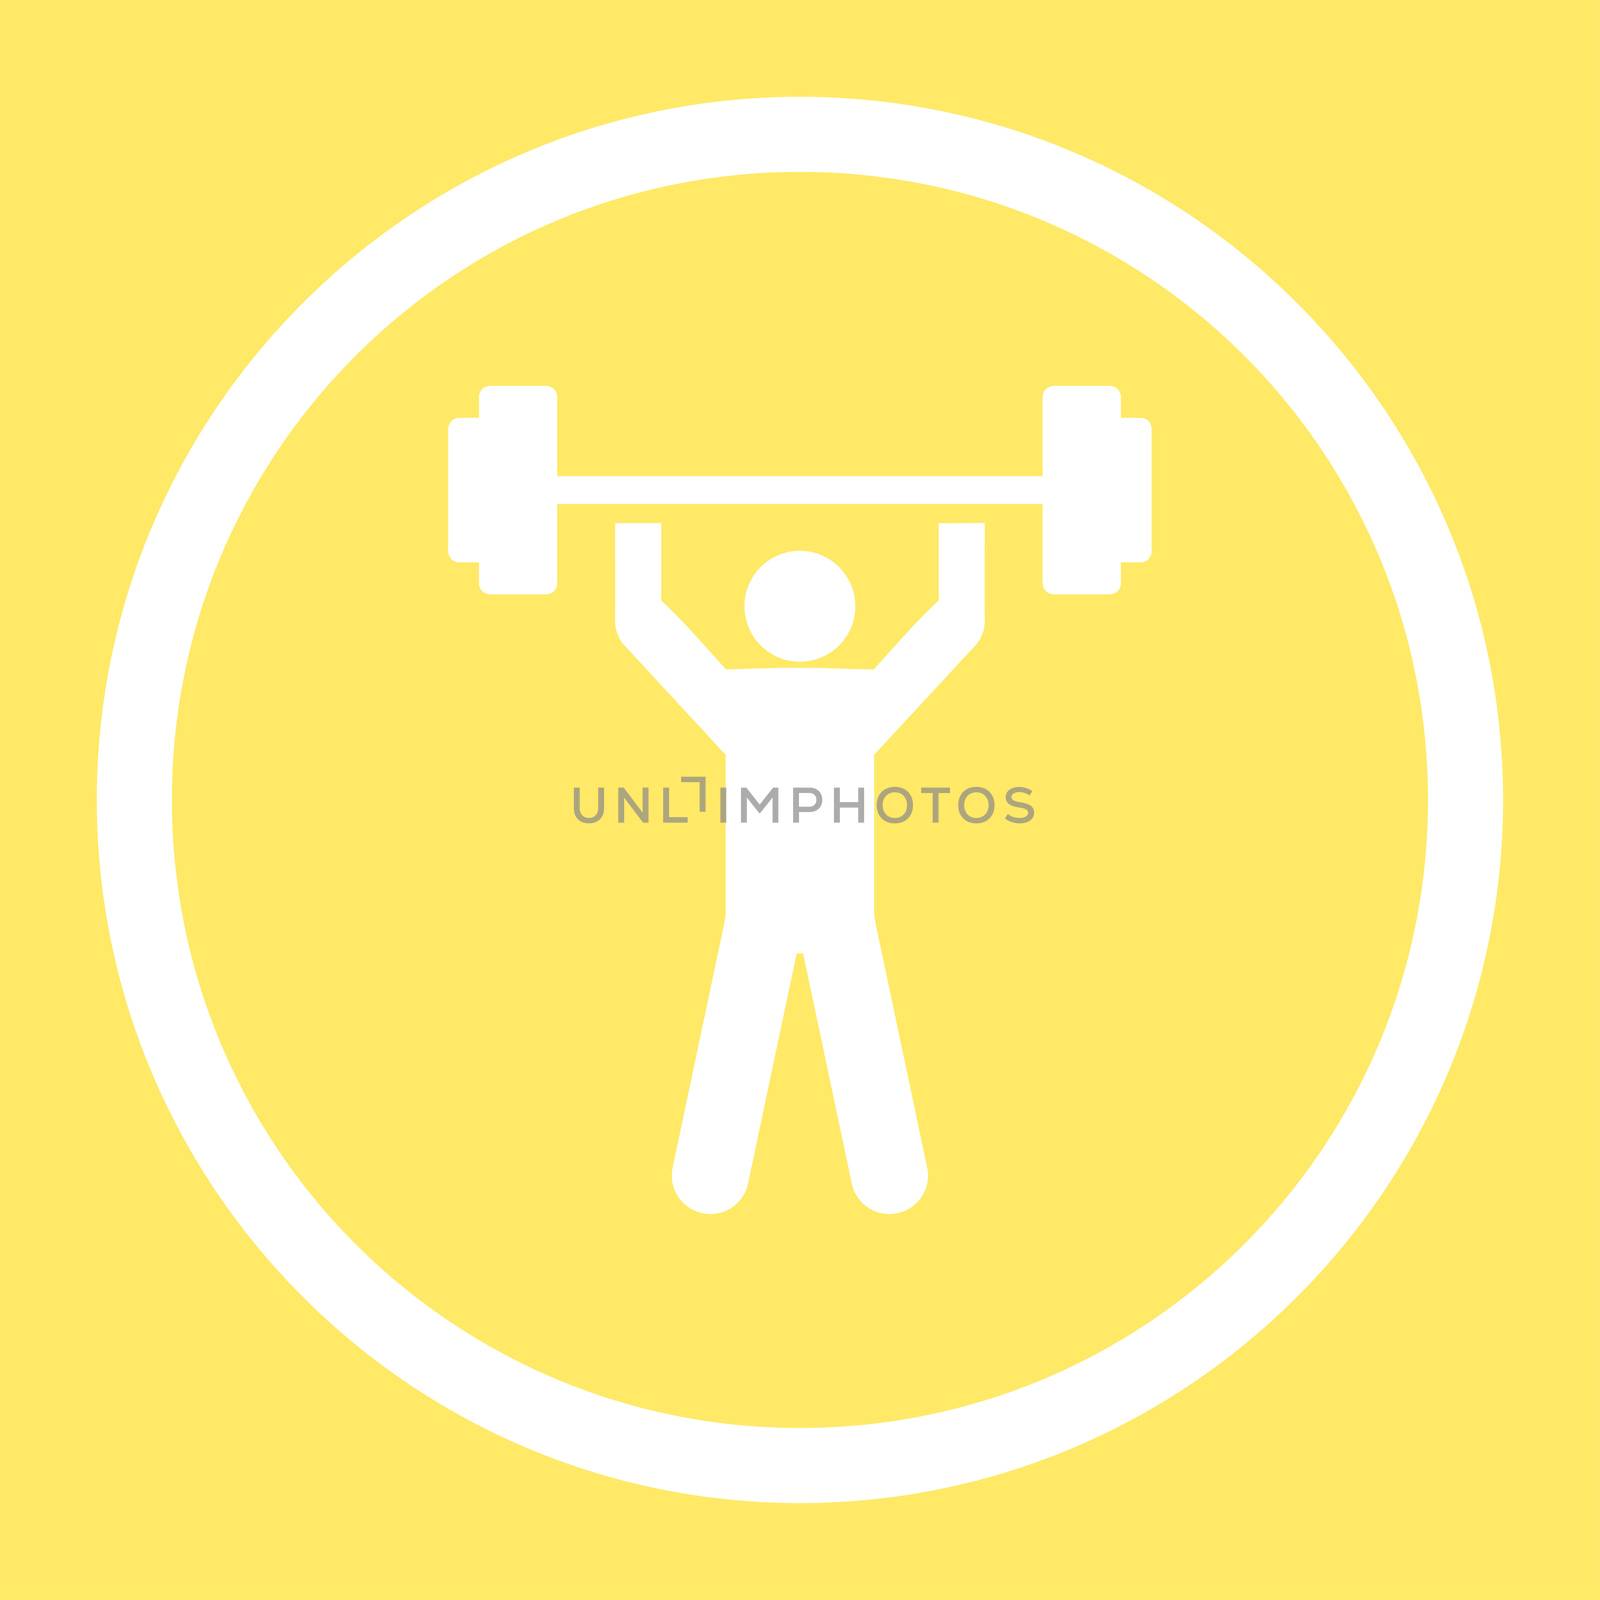 Power lifting glyph icon. This rounded flat symbol is drawn with white color on a yellow background.